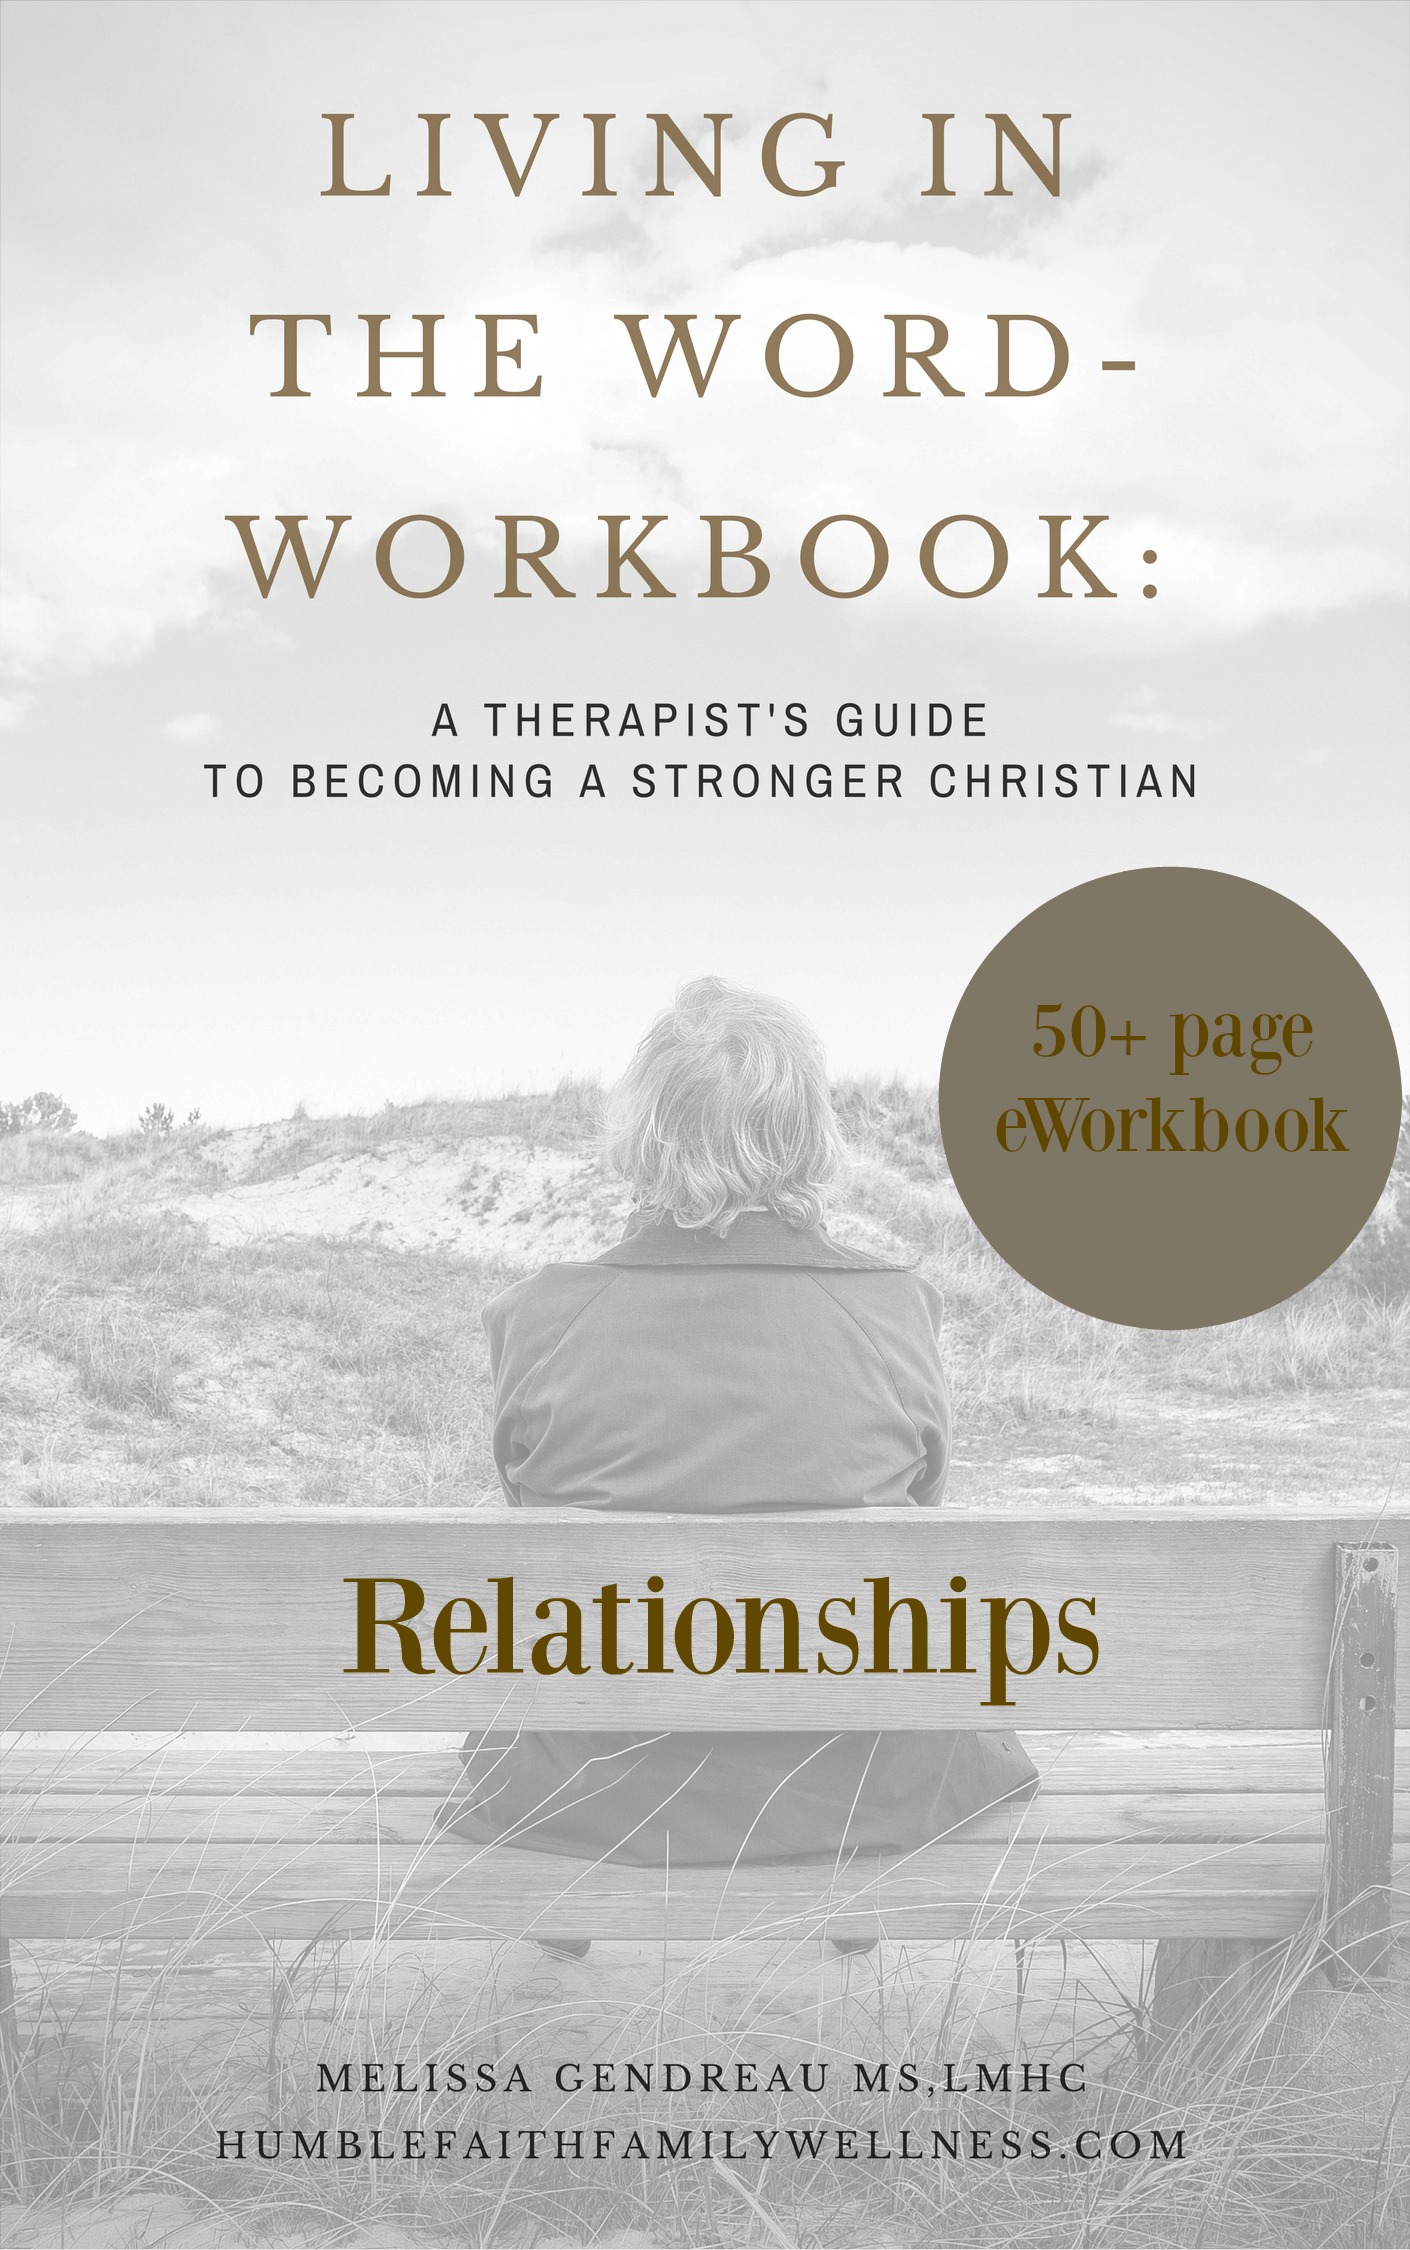 The Living in the Word eWorkbook: Relationships section will walk you through navigating extended family relationships as well as how you interact and connect with others. Only $2.50